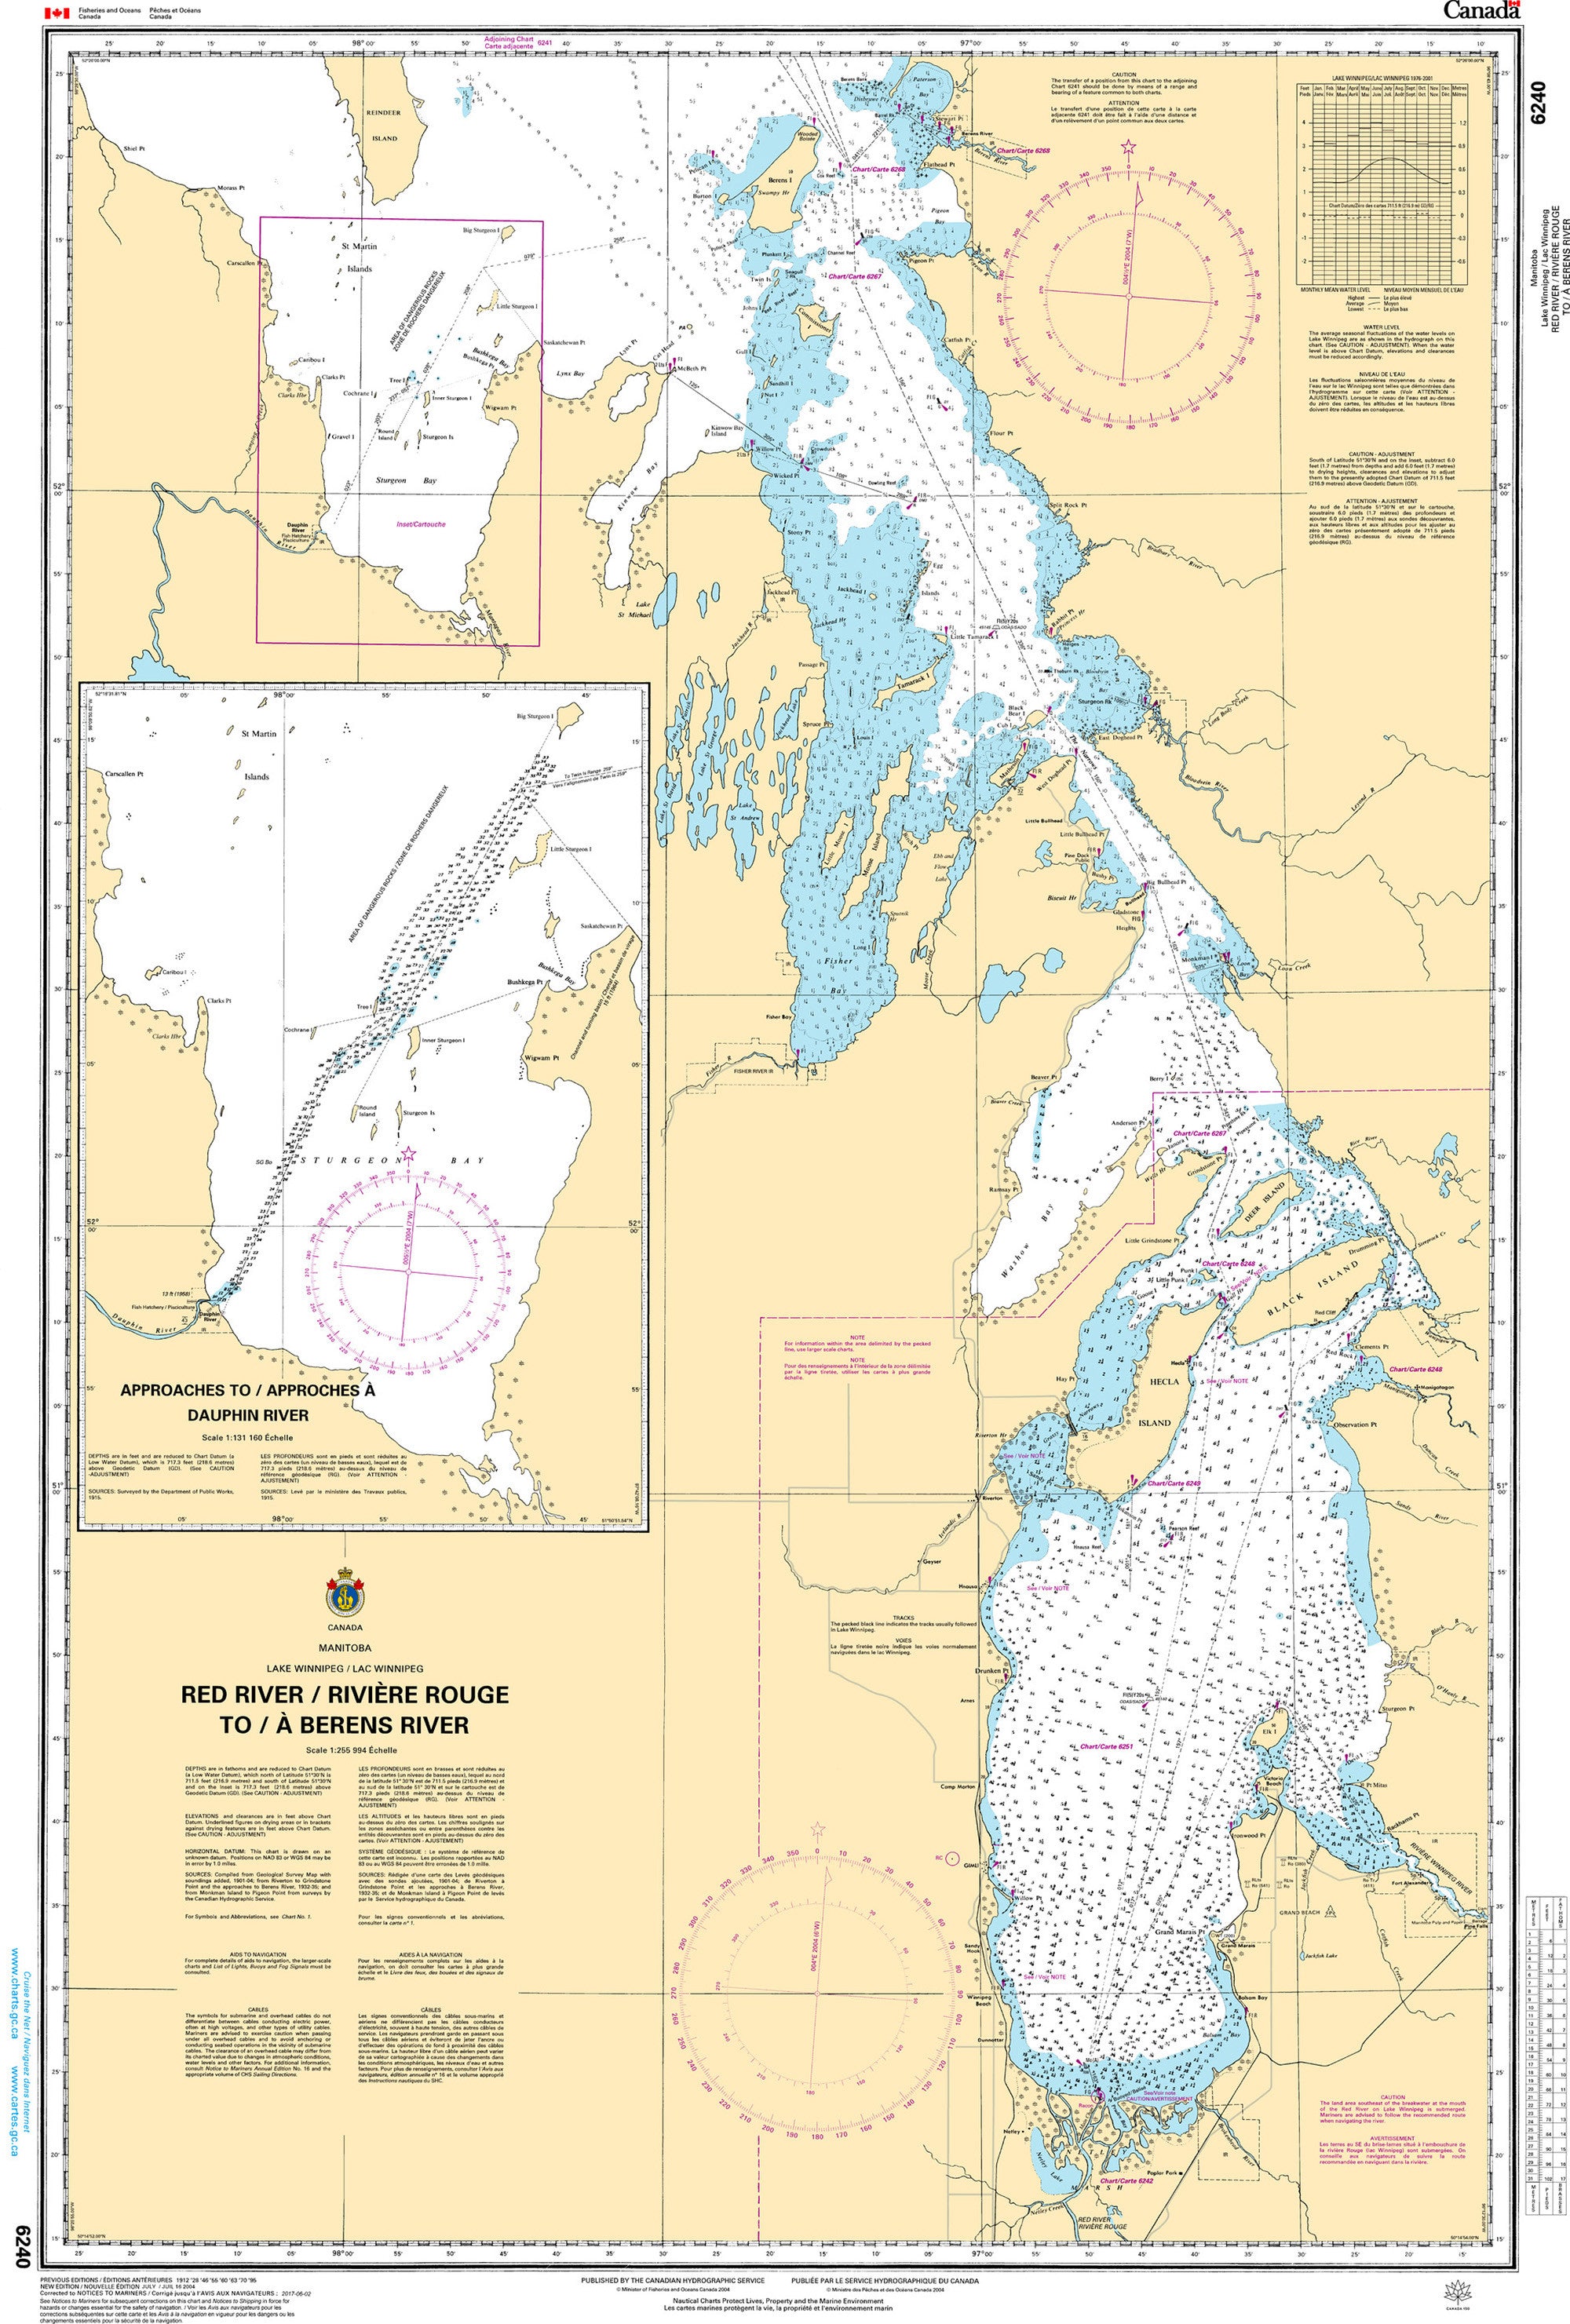 Canadian Hydrographic Service Nautical Chart CHS6240: Red River / Rivière Rouge to/à Berens River